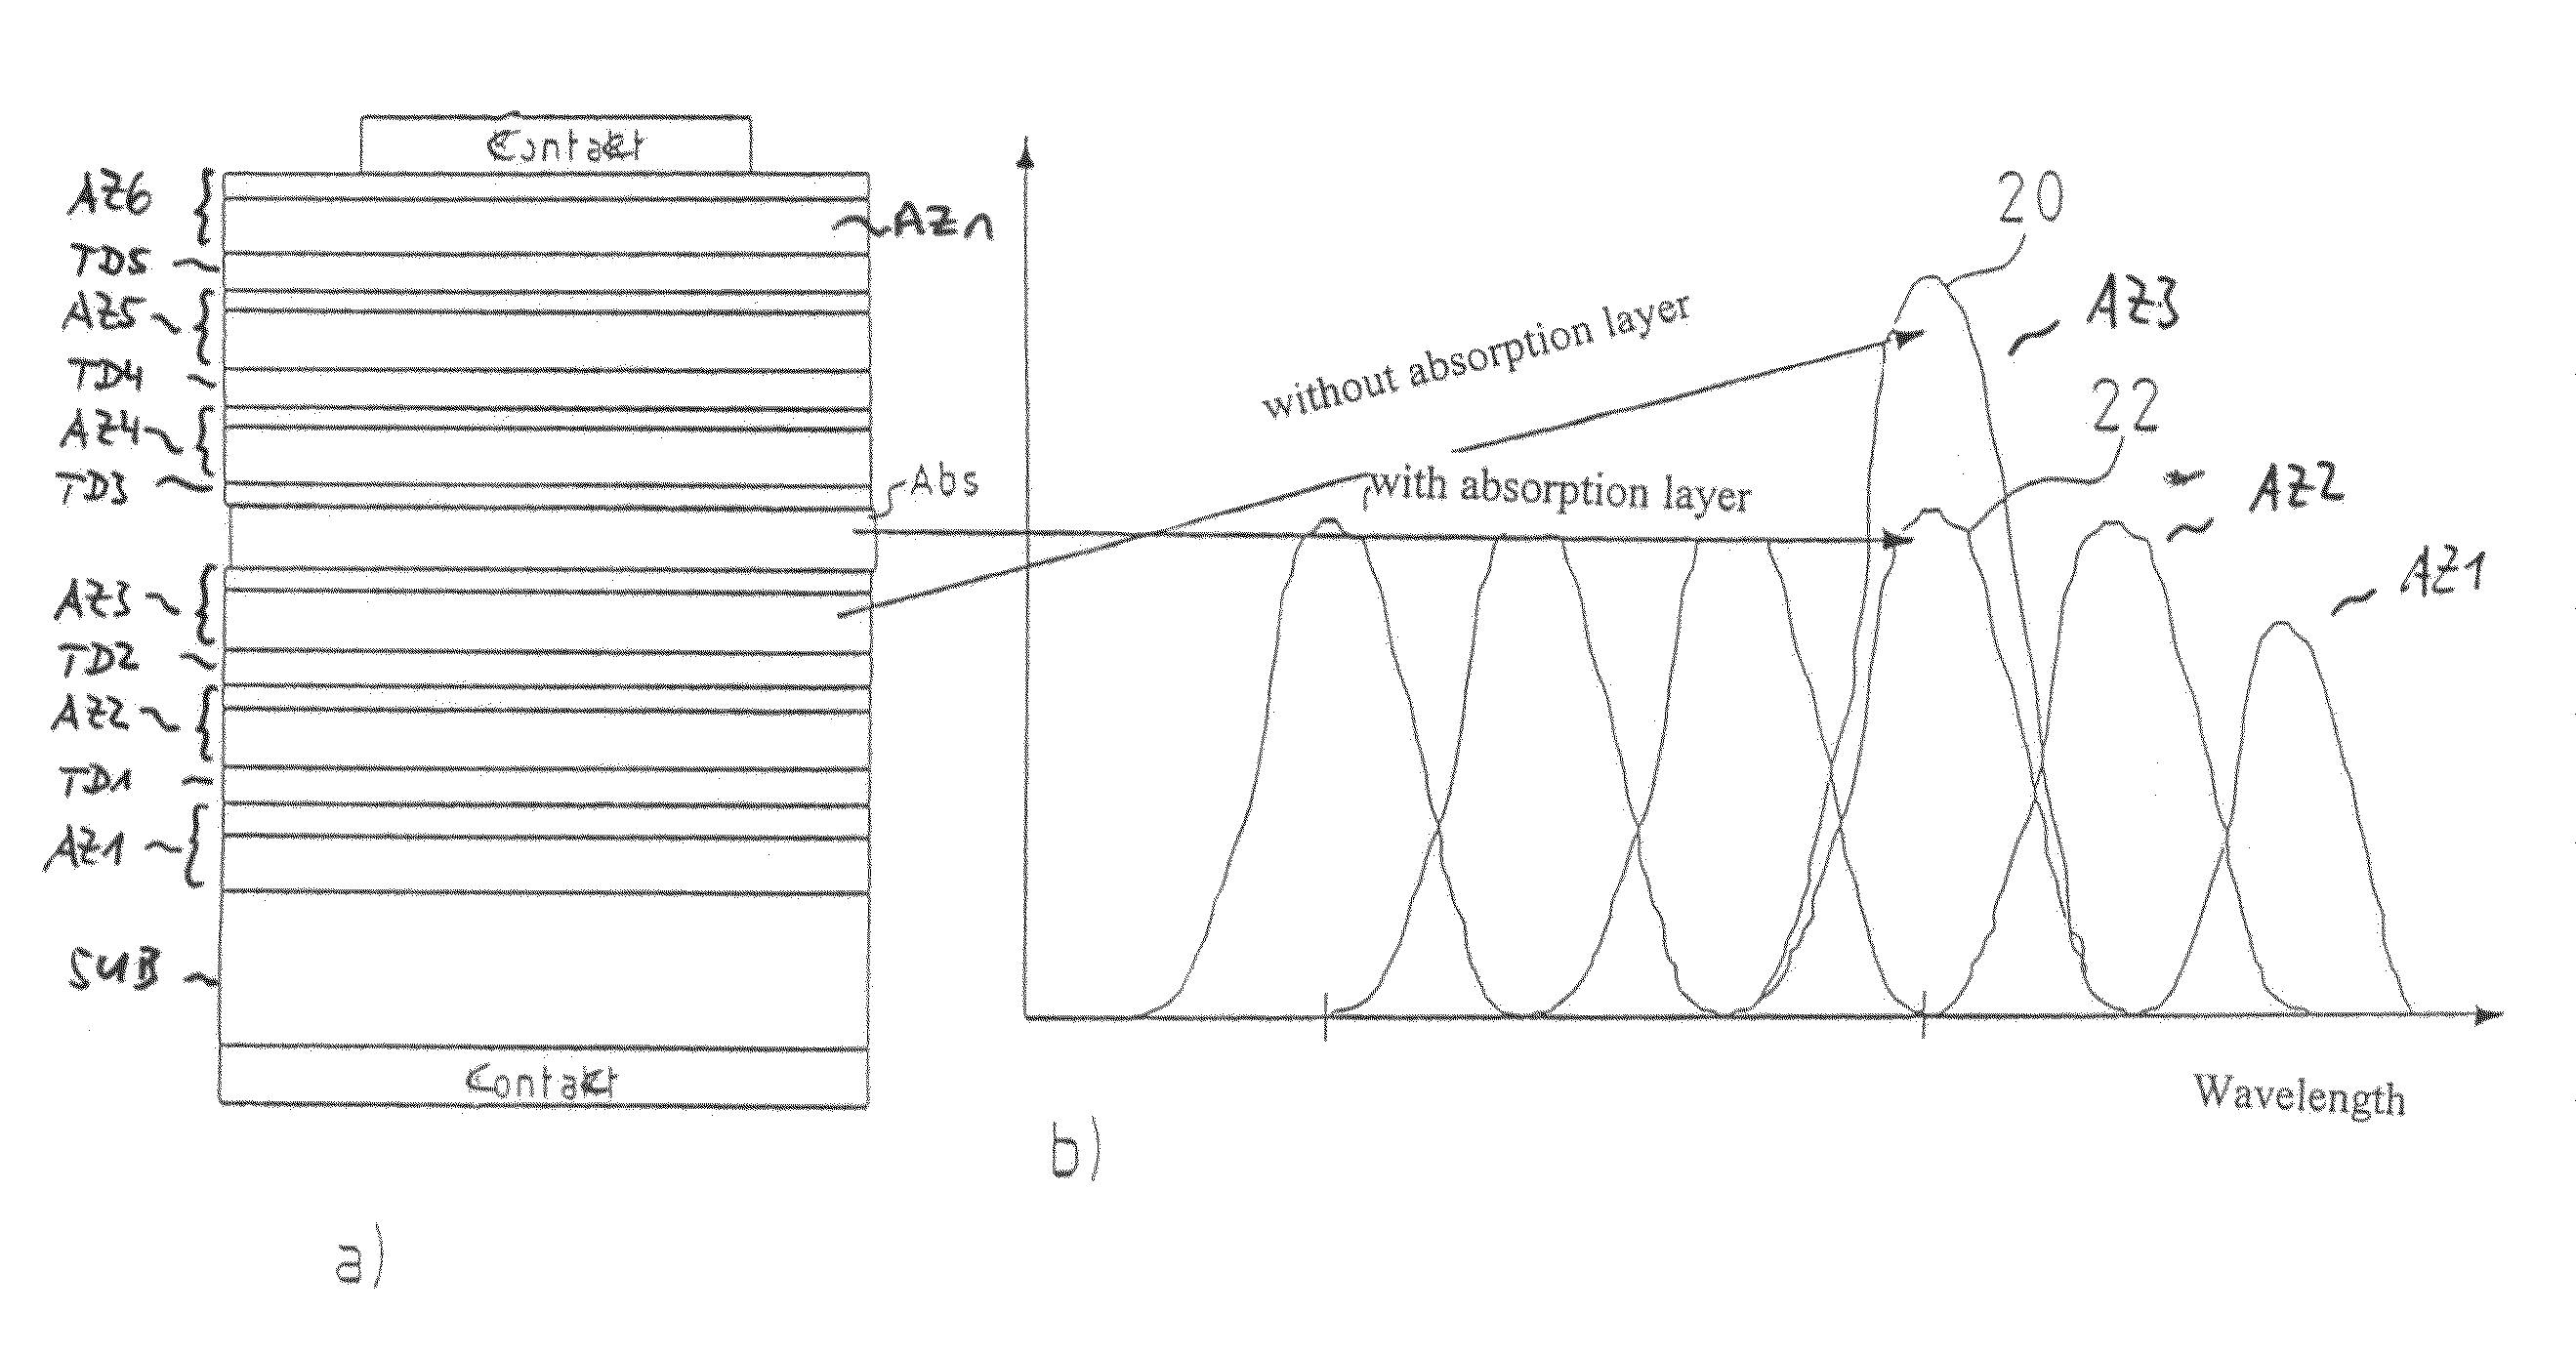 Semiconductor structure comprising active zones